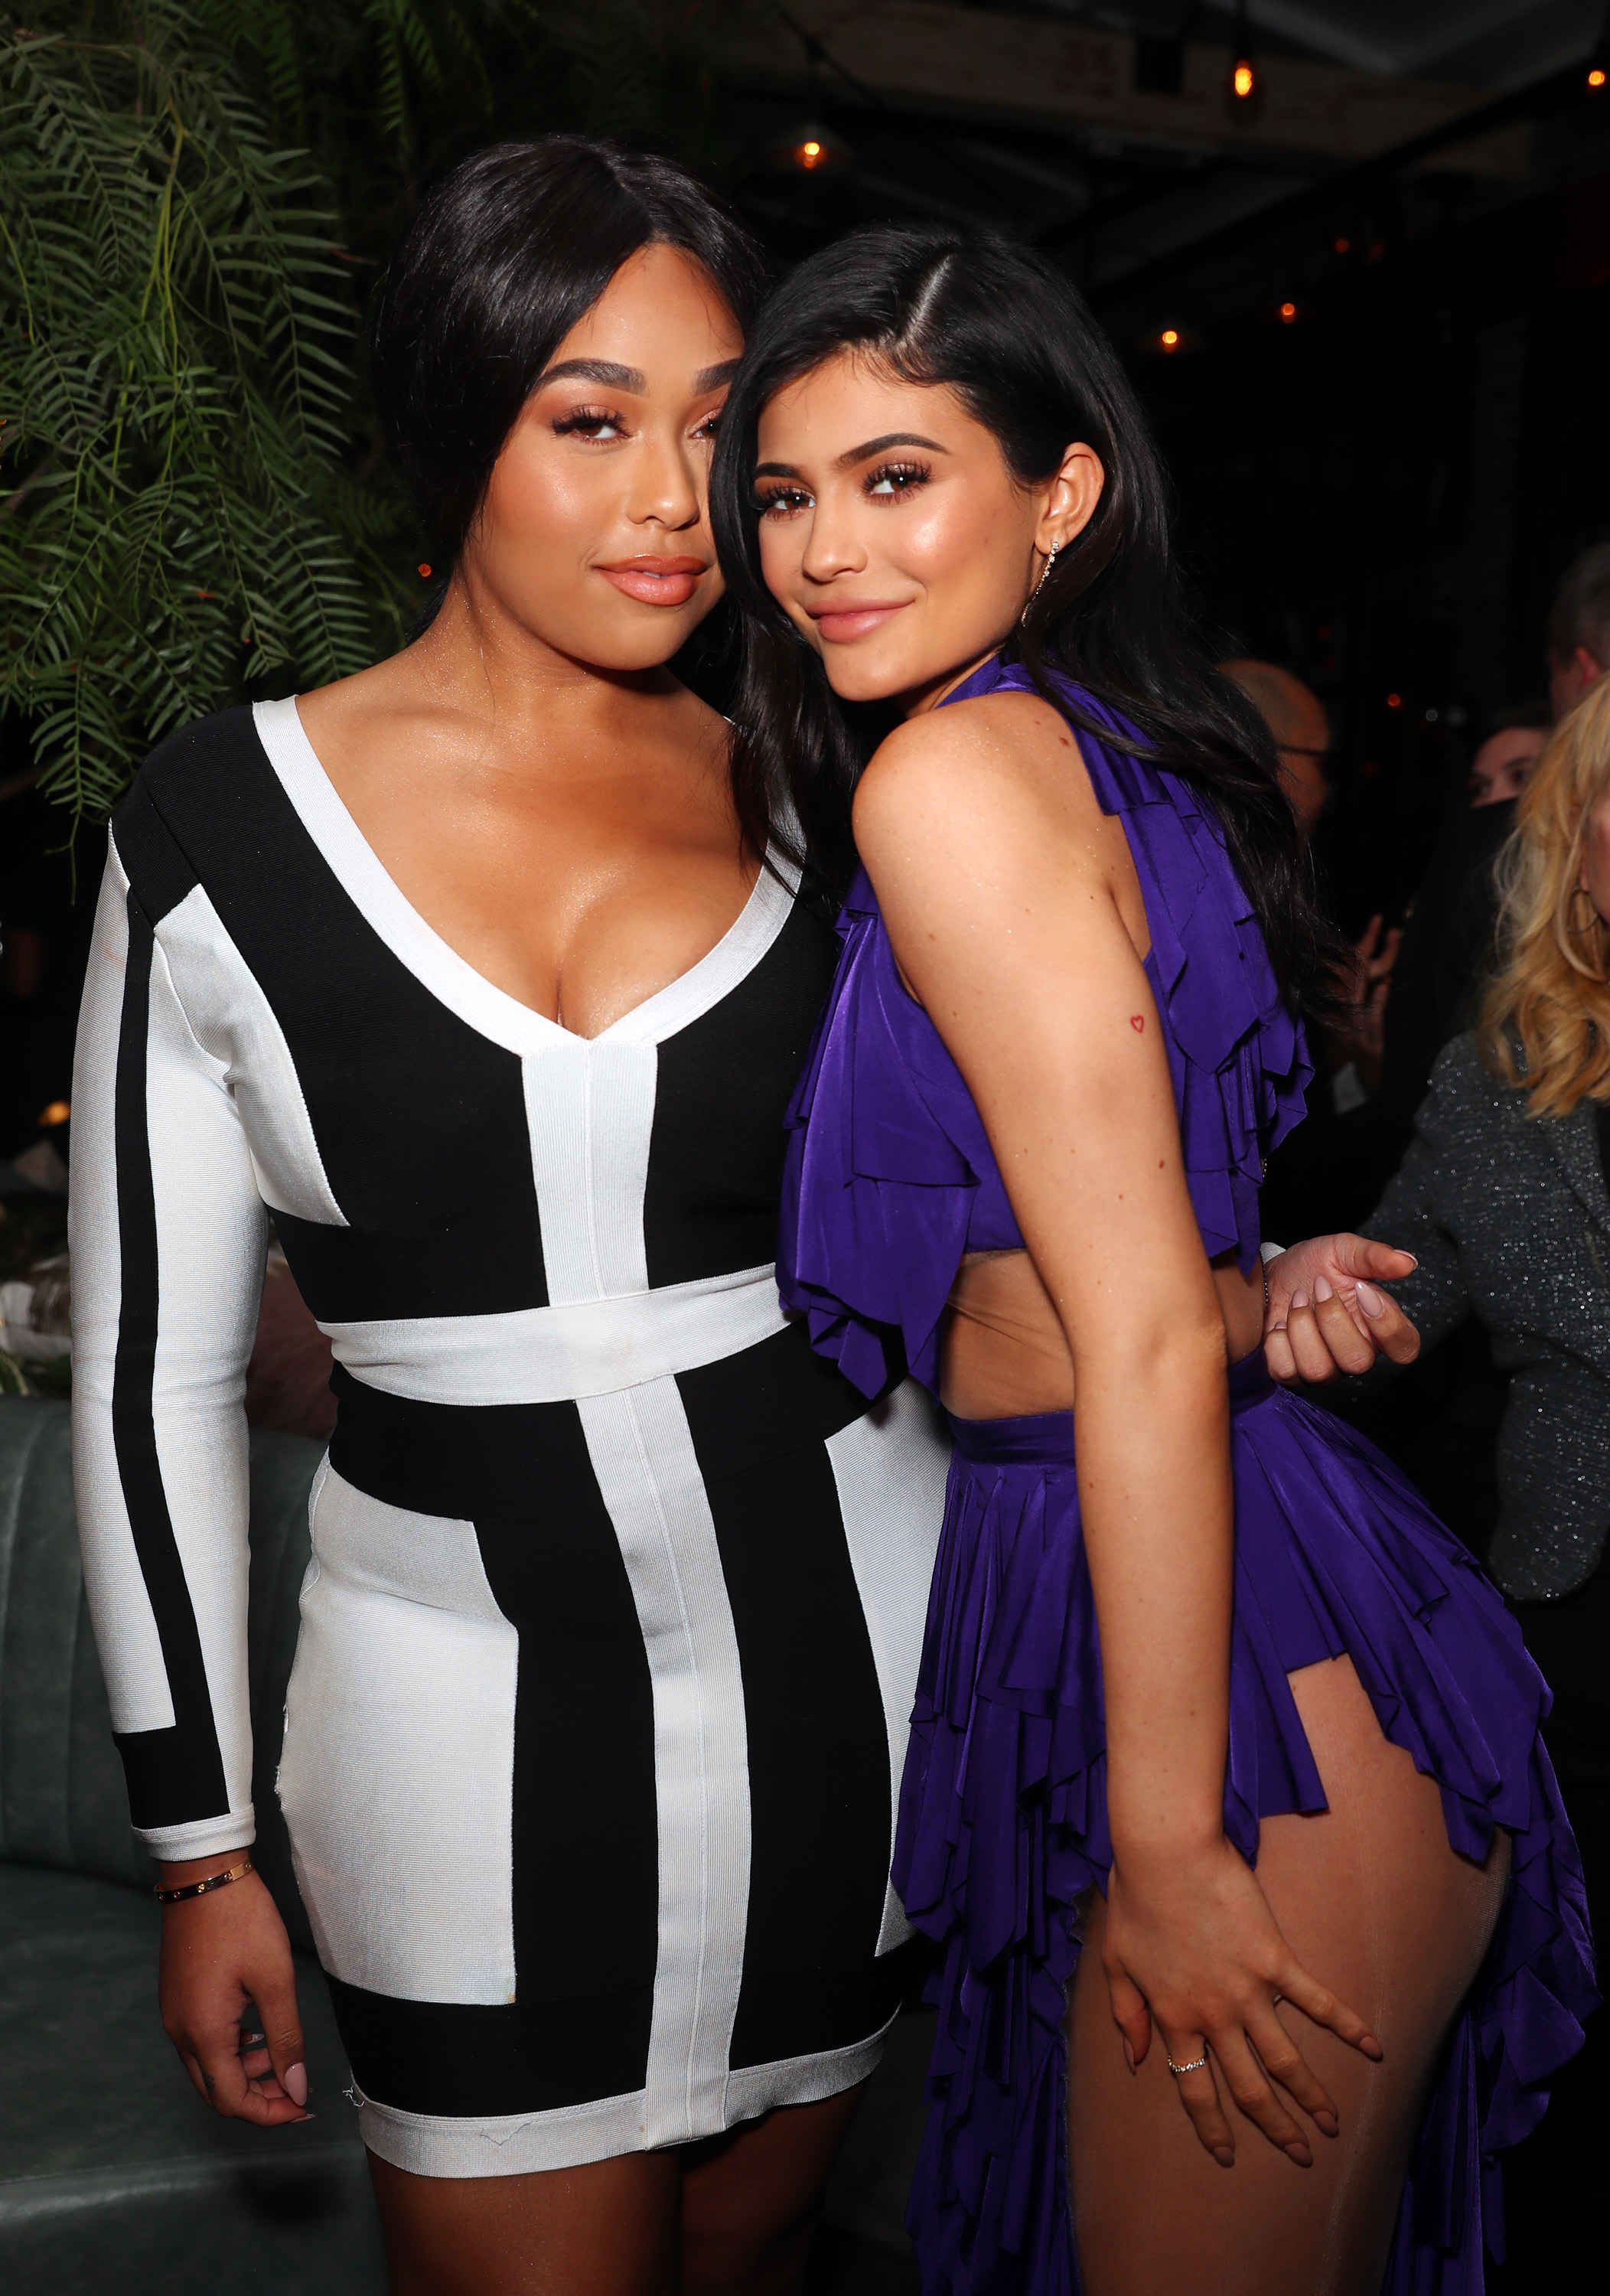 Kylie Jenner and Jordyn Woods seen after their reunion as they